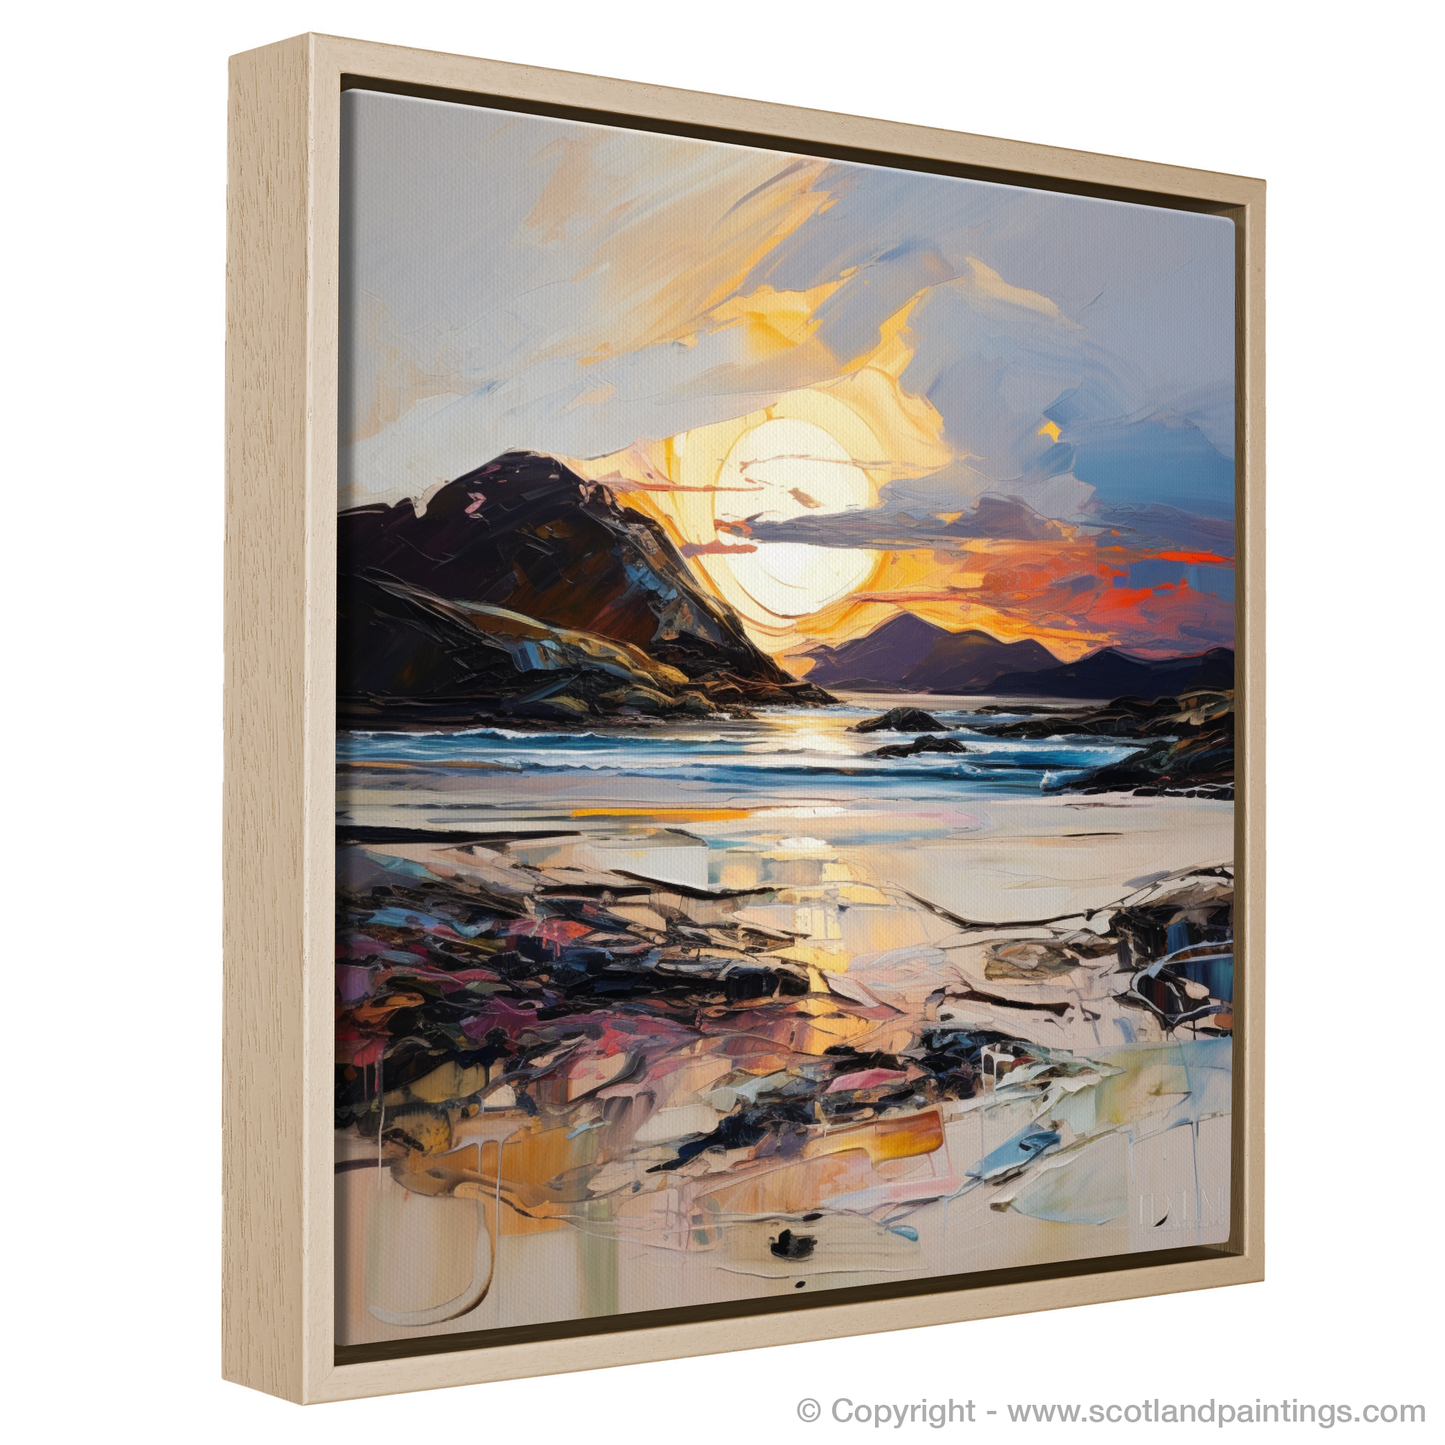 Painting and Art Print of Traigh Mhor at sunset entitled "Sunset Embrace at Traigh Mhor".